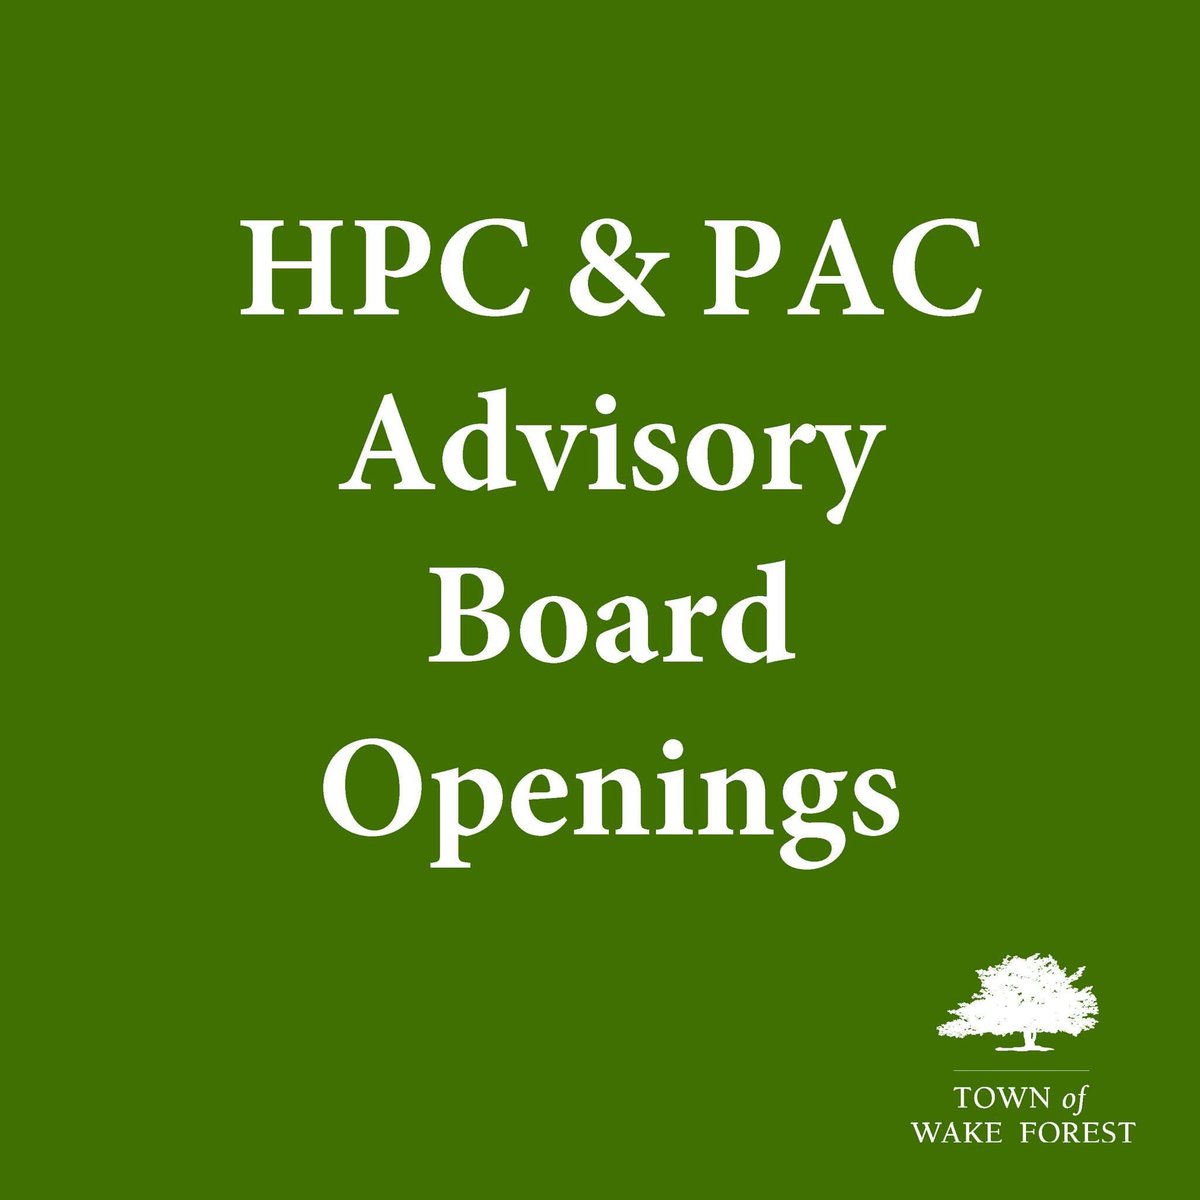 LAST DAY to apply for Historic Preservation Commission & Public Art Commission! 

The online advisory board application is available at bit.ly/TOWFAdvBoardAp…. 

#TownofWakeForest #WakeForestNC #AdvisoryBoards #HistoricPreservationCommission #PublicArtCommission